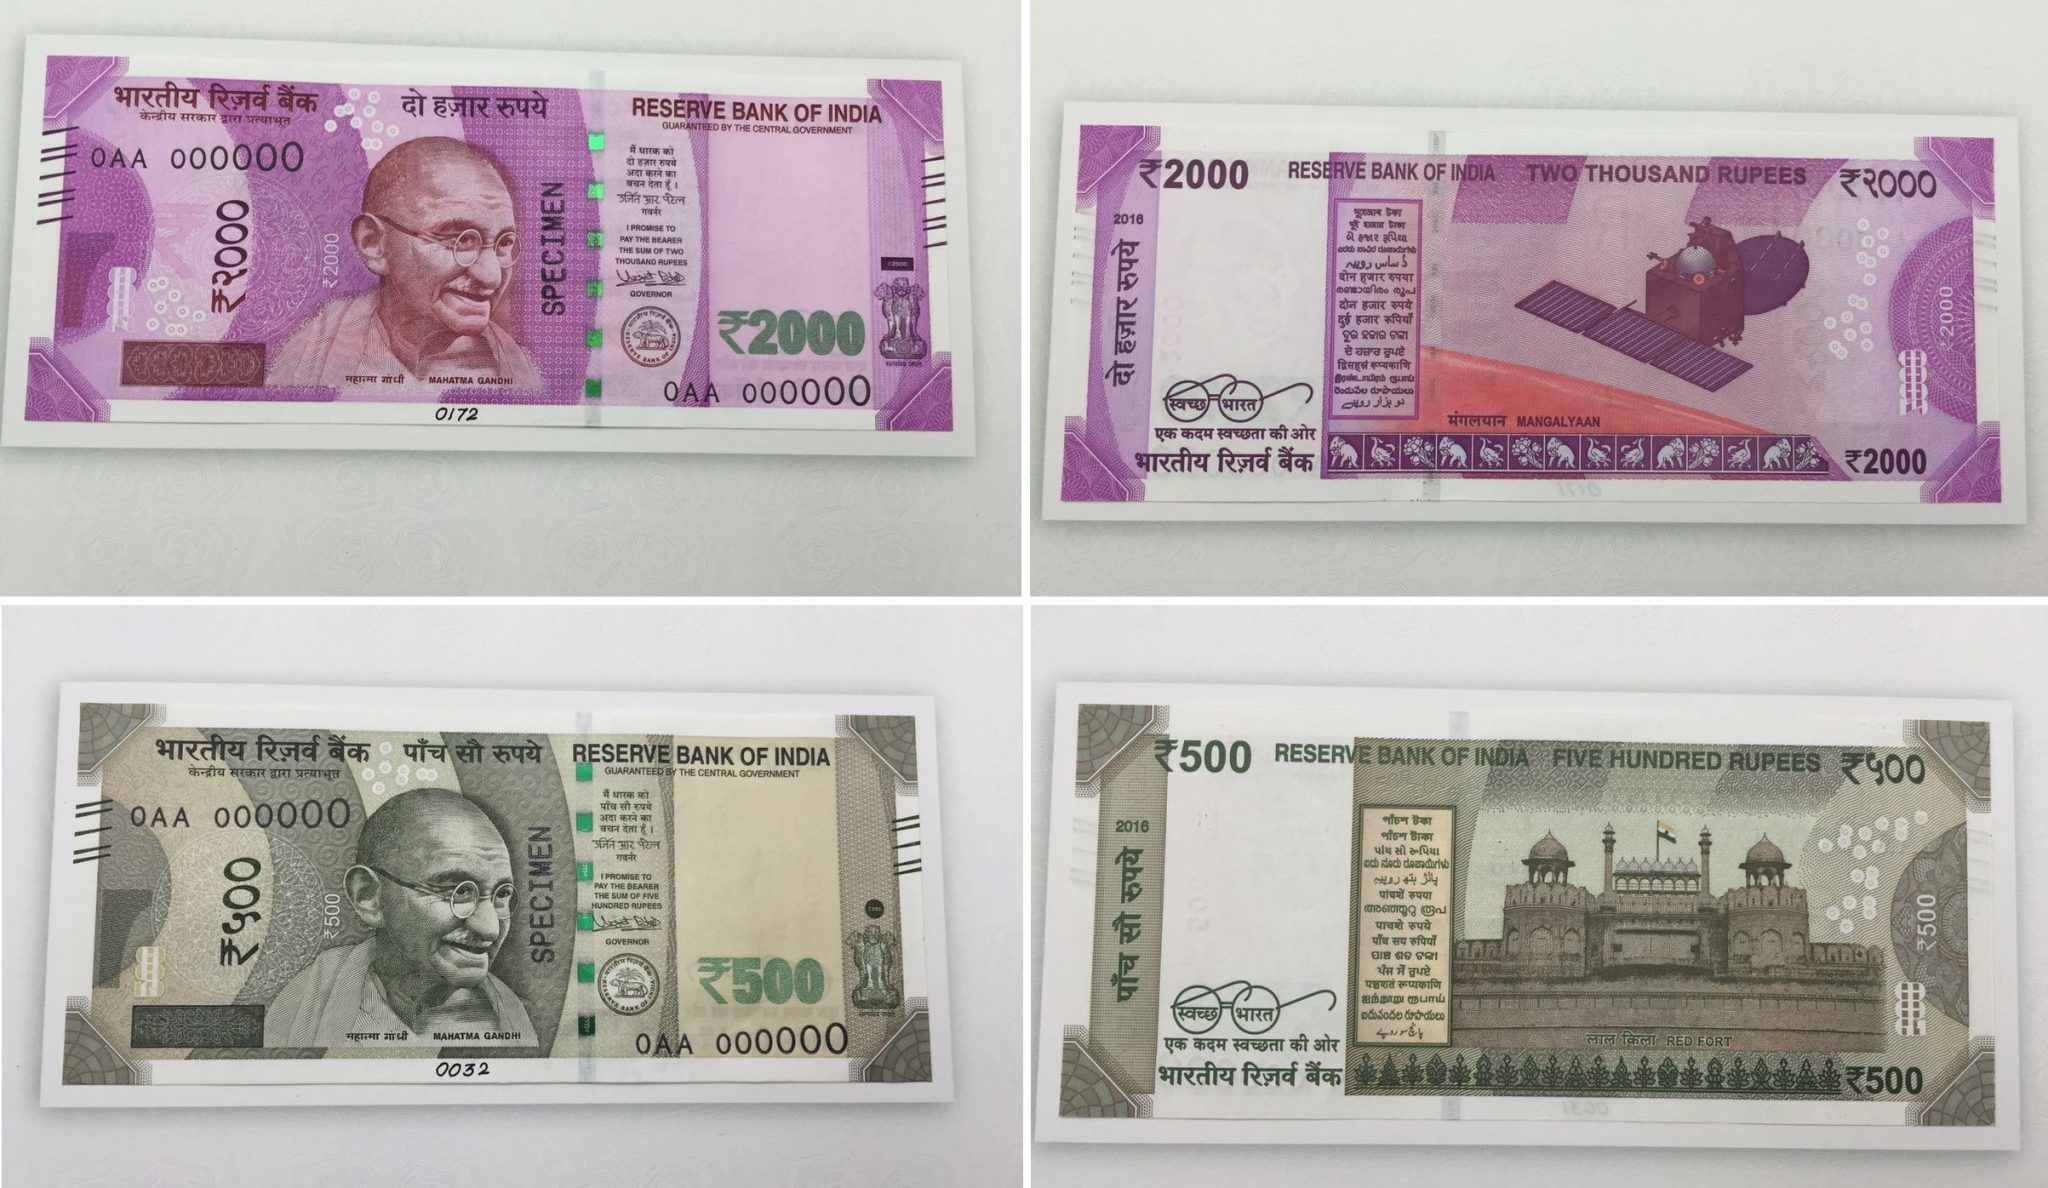 Complete details about discontinuation of Rs 500 & 1000 notes 1